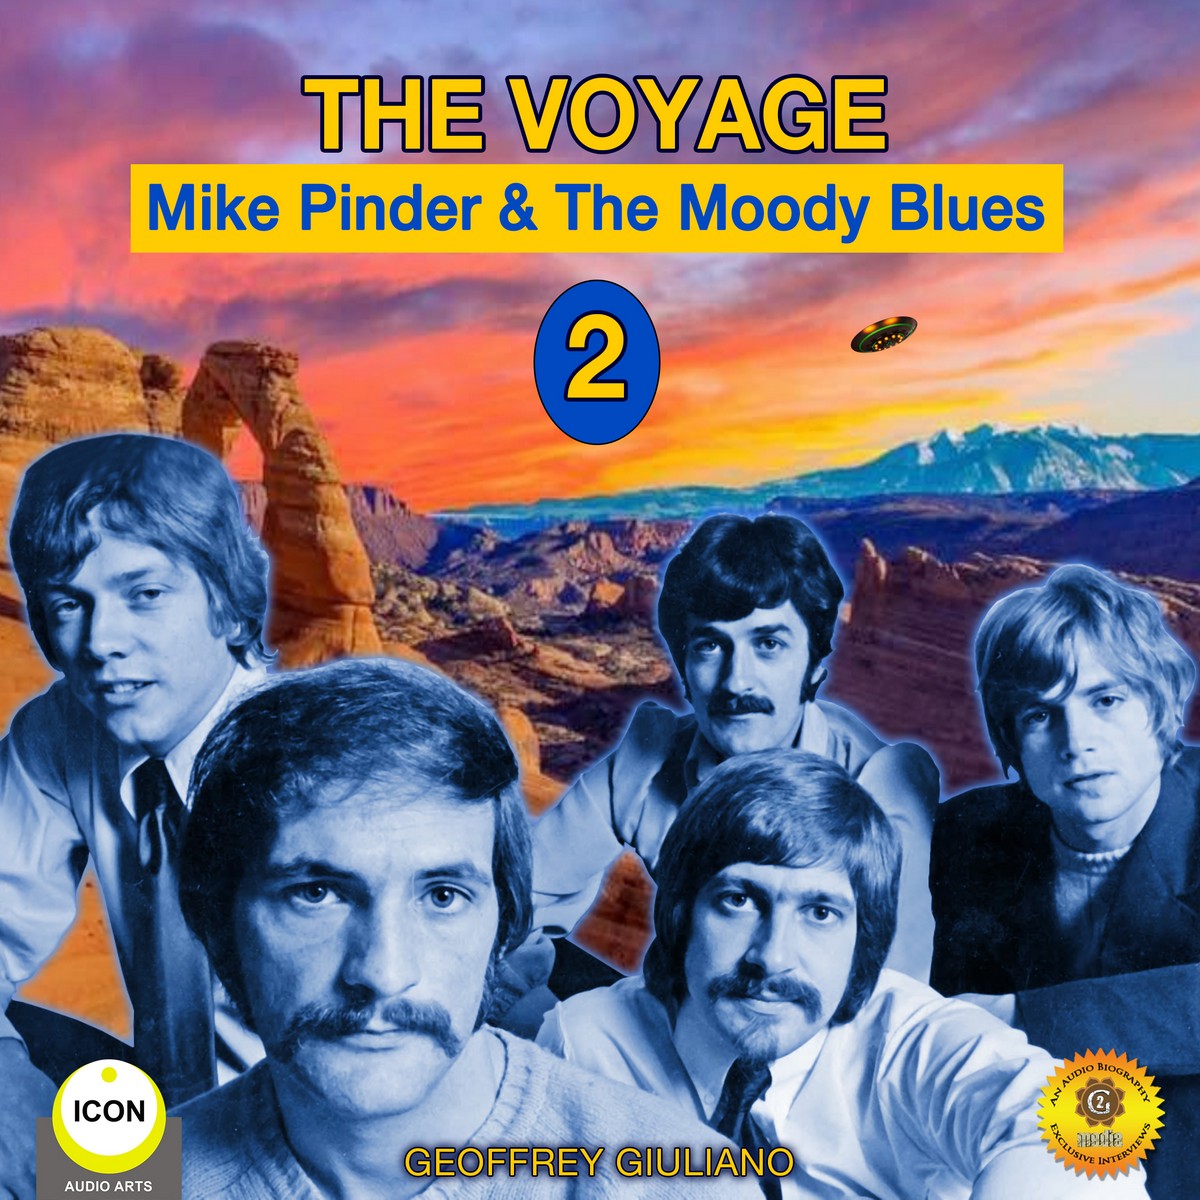 The Voyage 2 – Mike Pinder & The Moody Blues